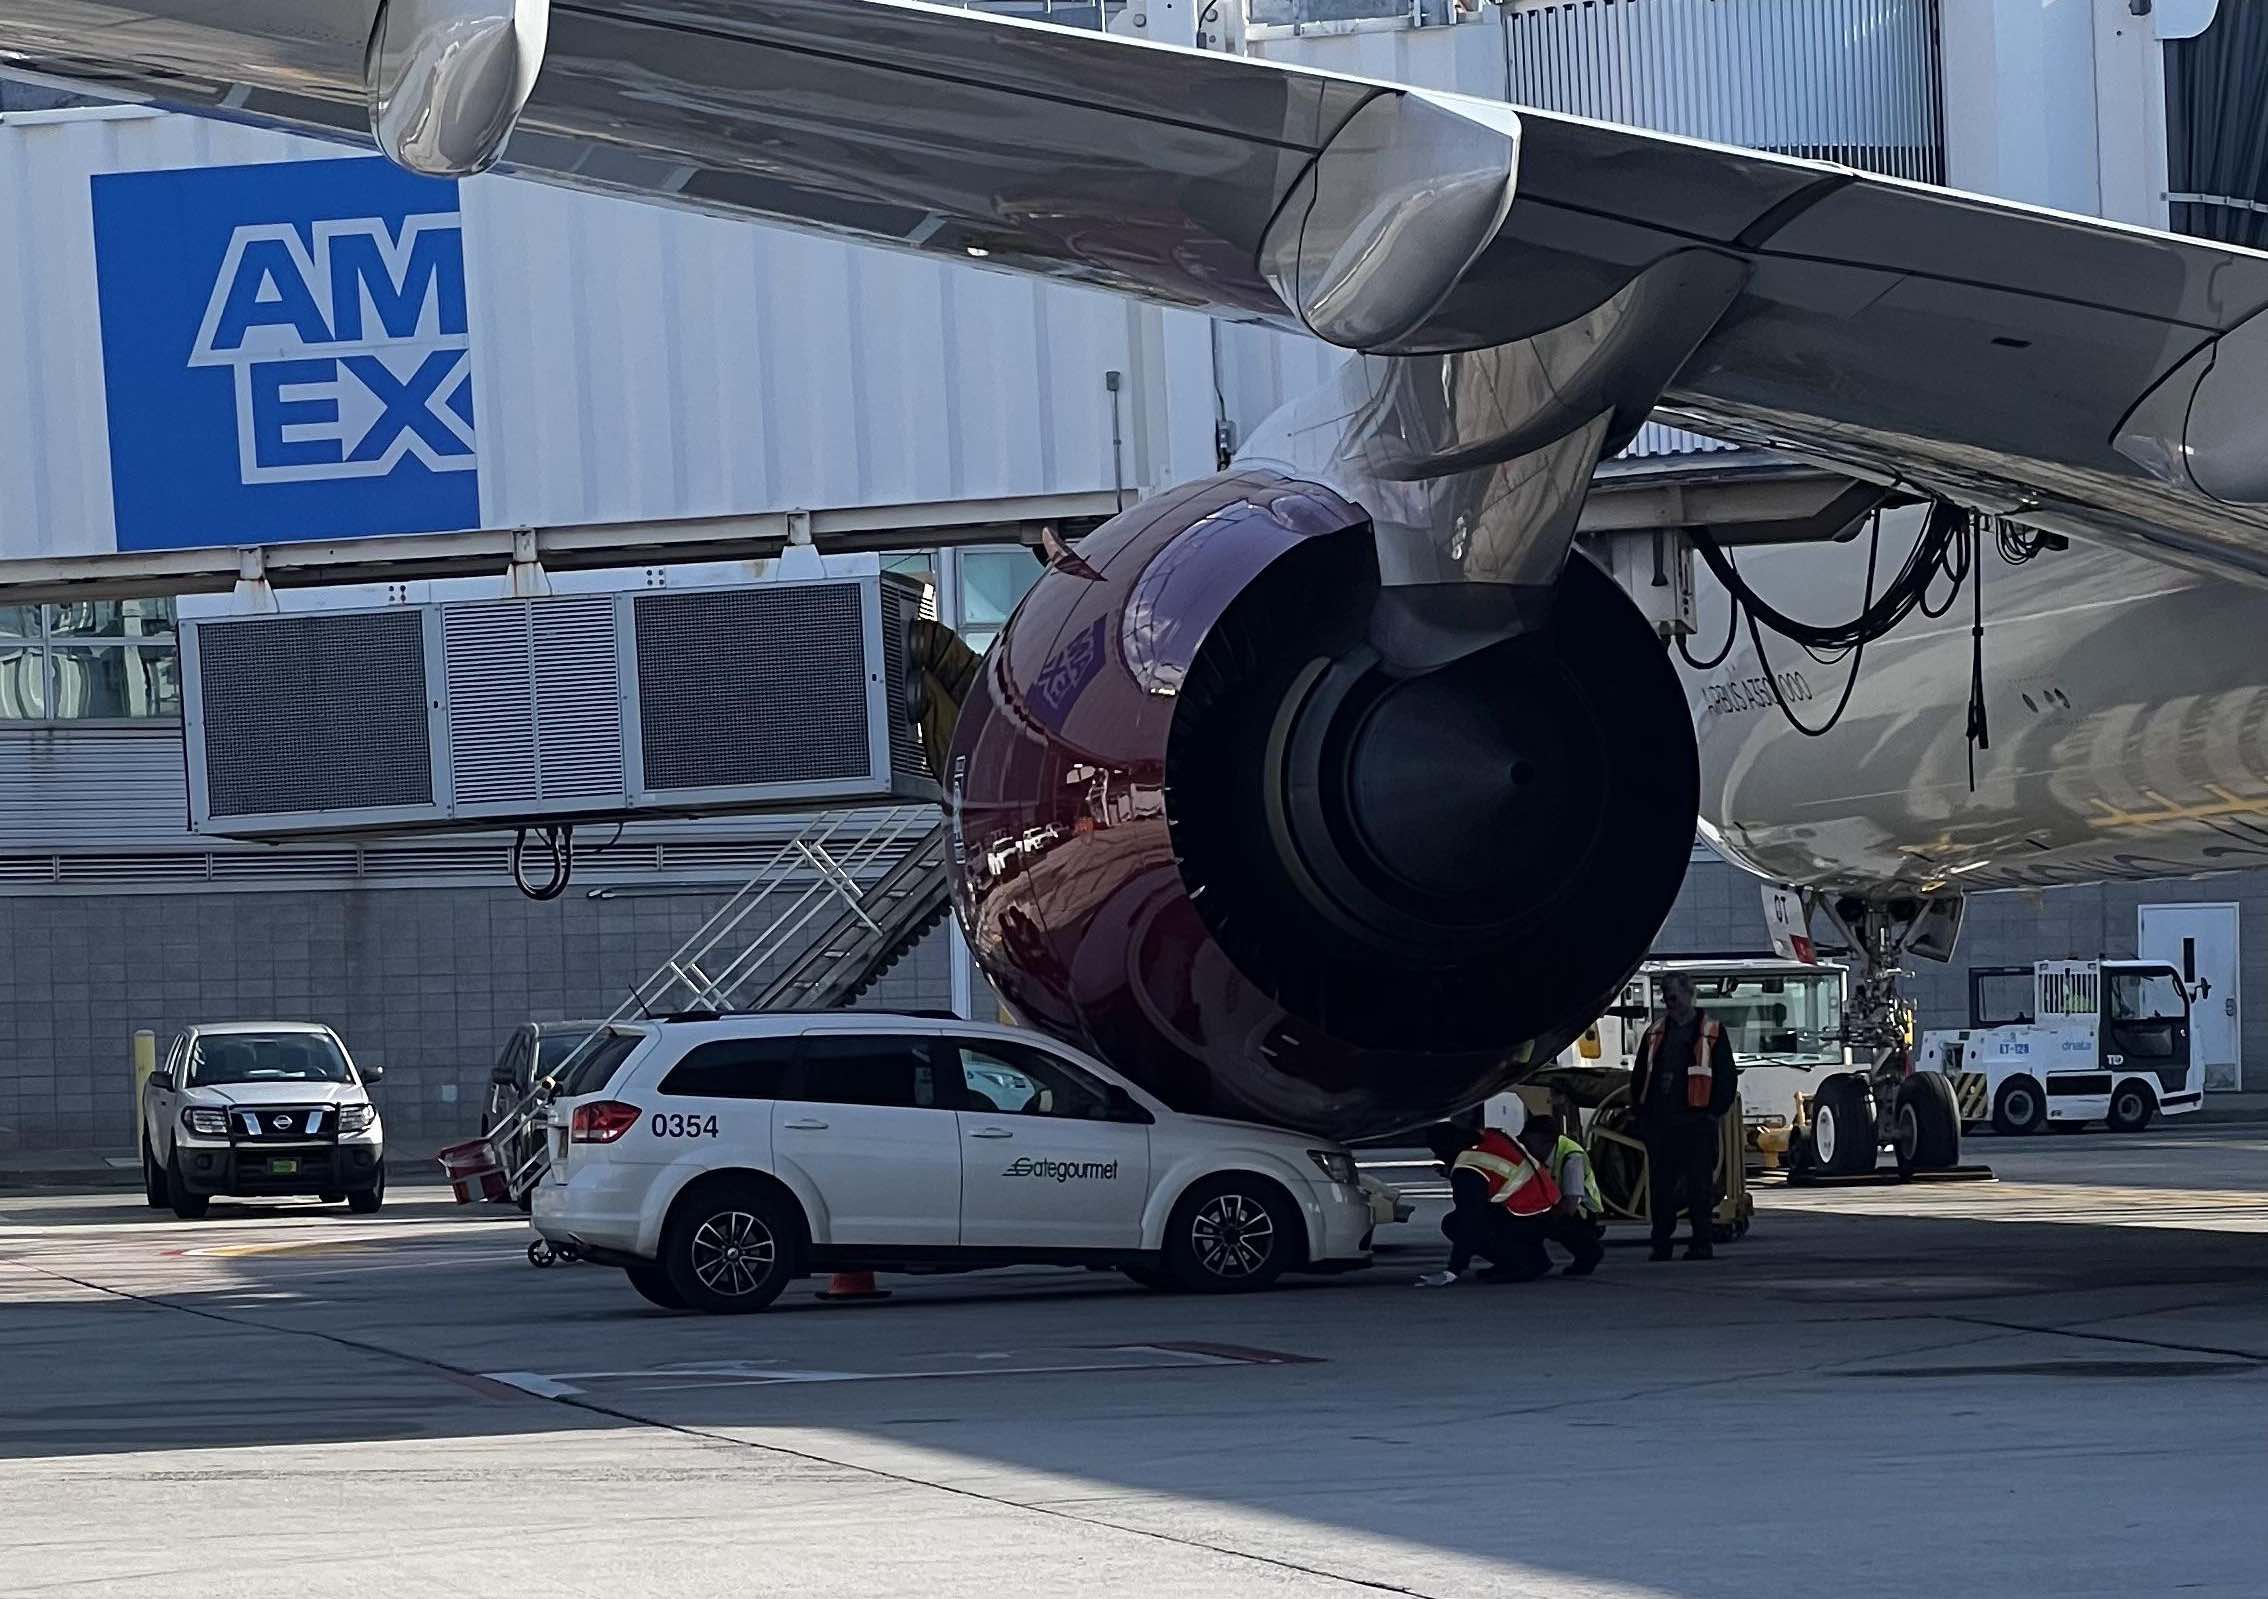 a plane engine and a car